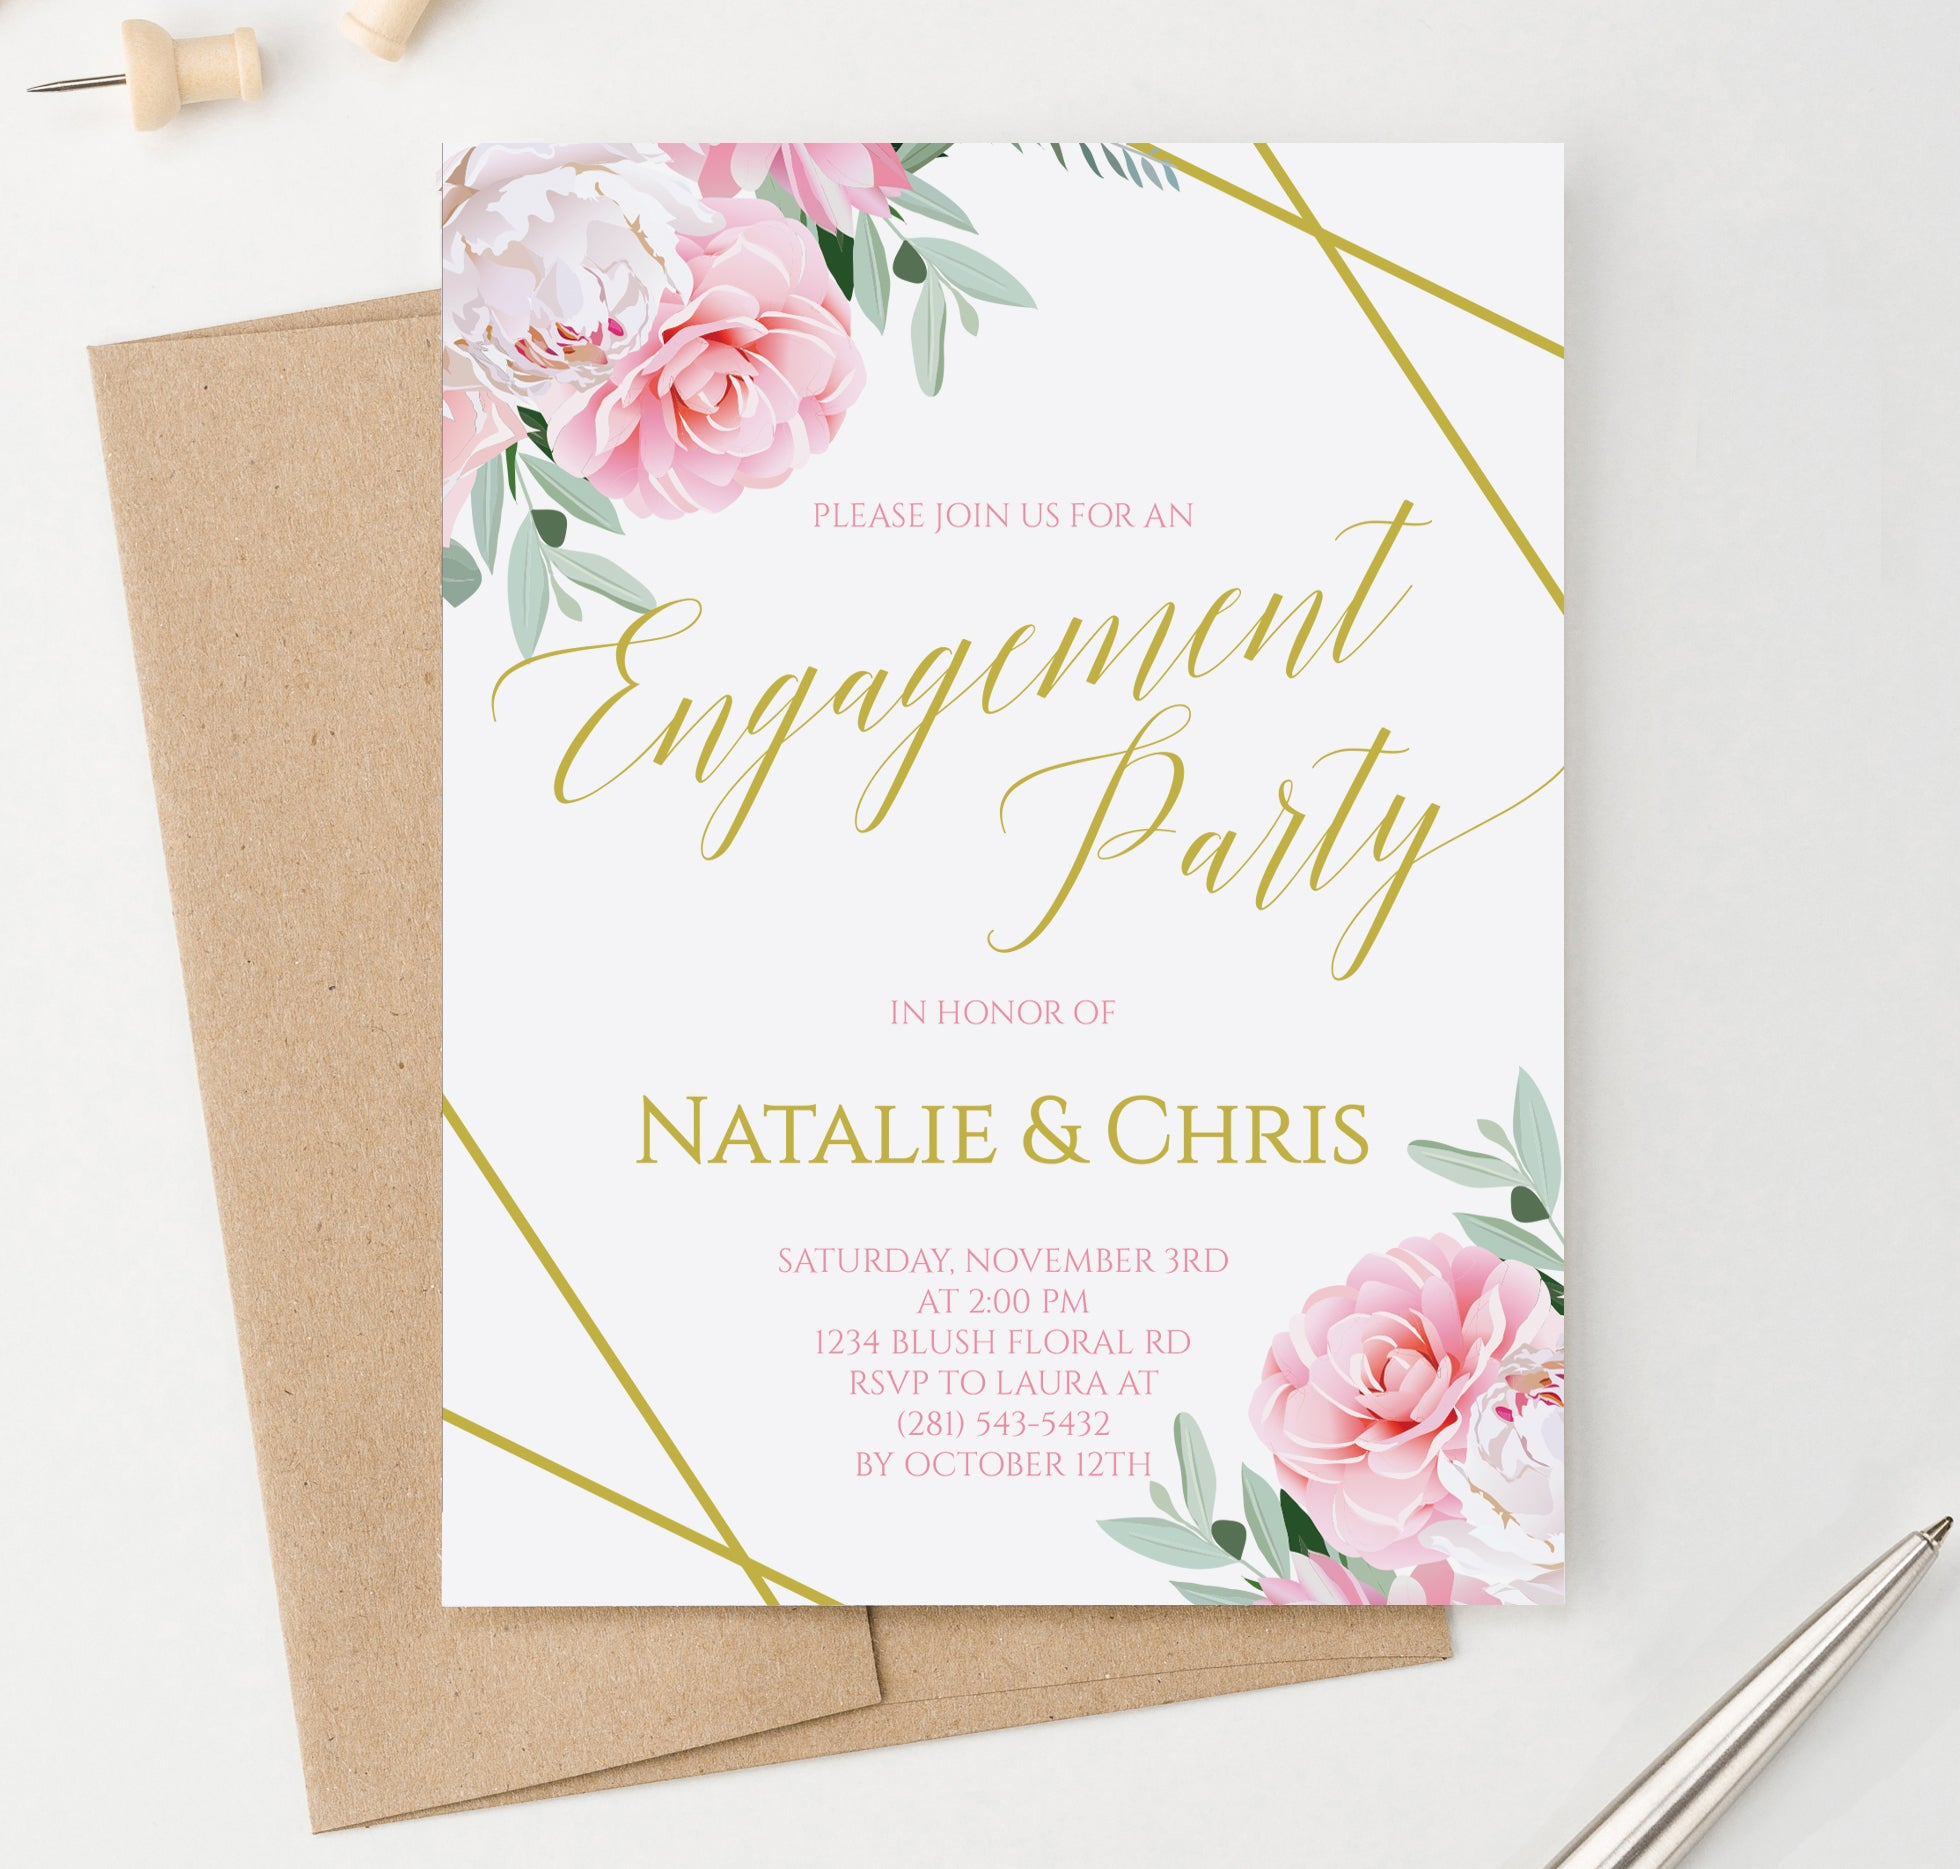 Elegant Personalized Engagement Party Invitations With Floral Corner